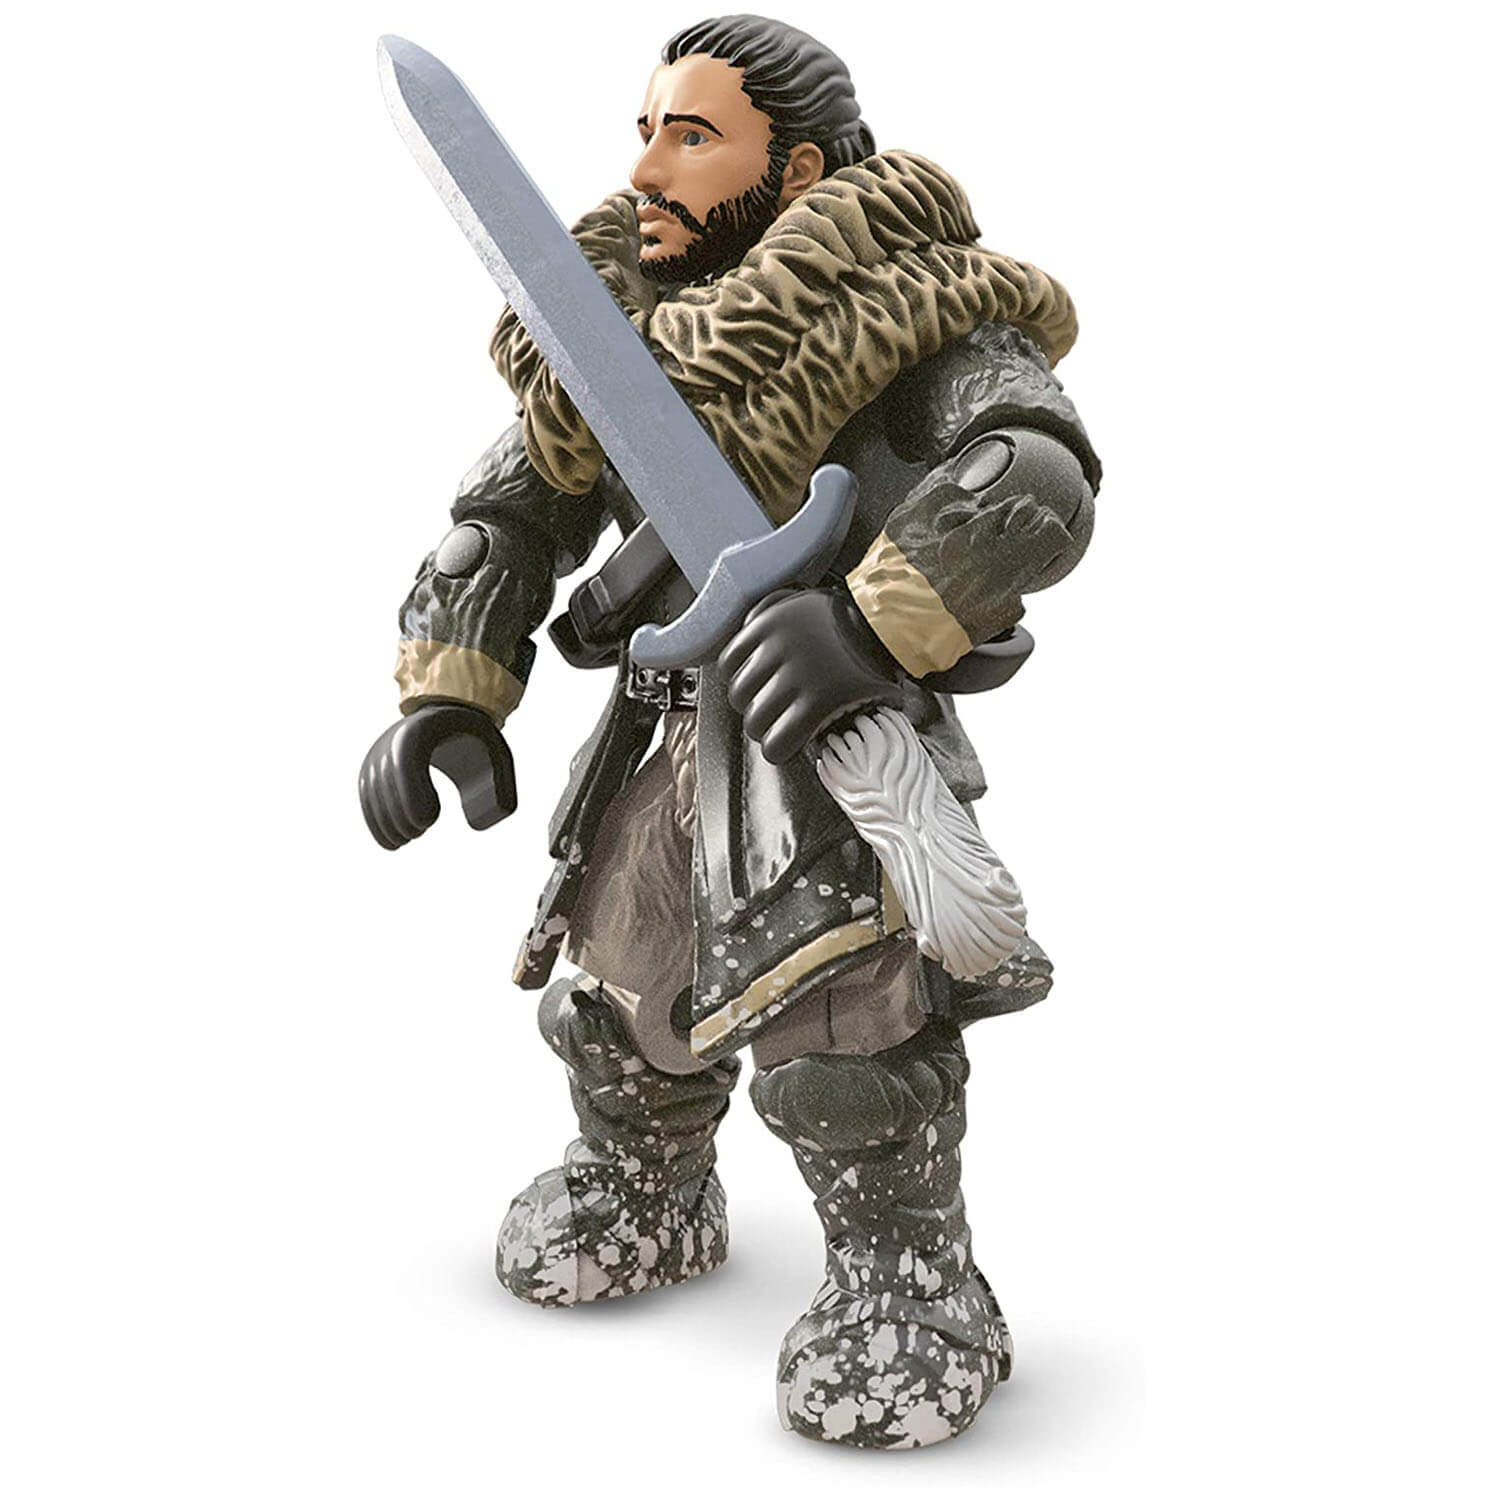 Front view of the game of thrones figure.